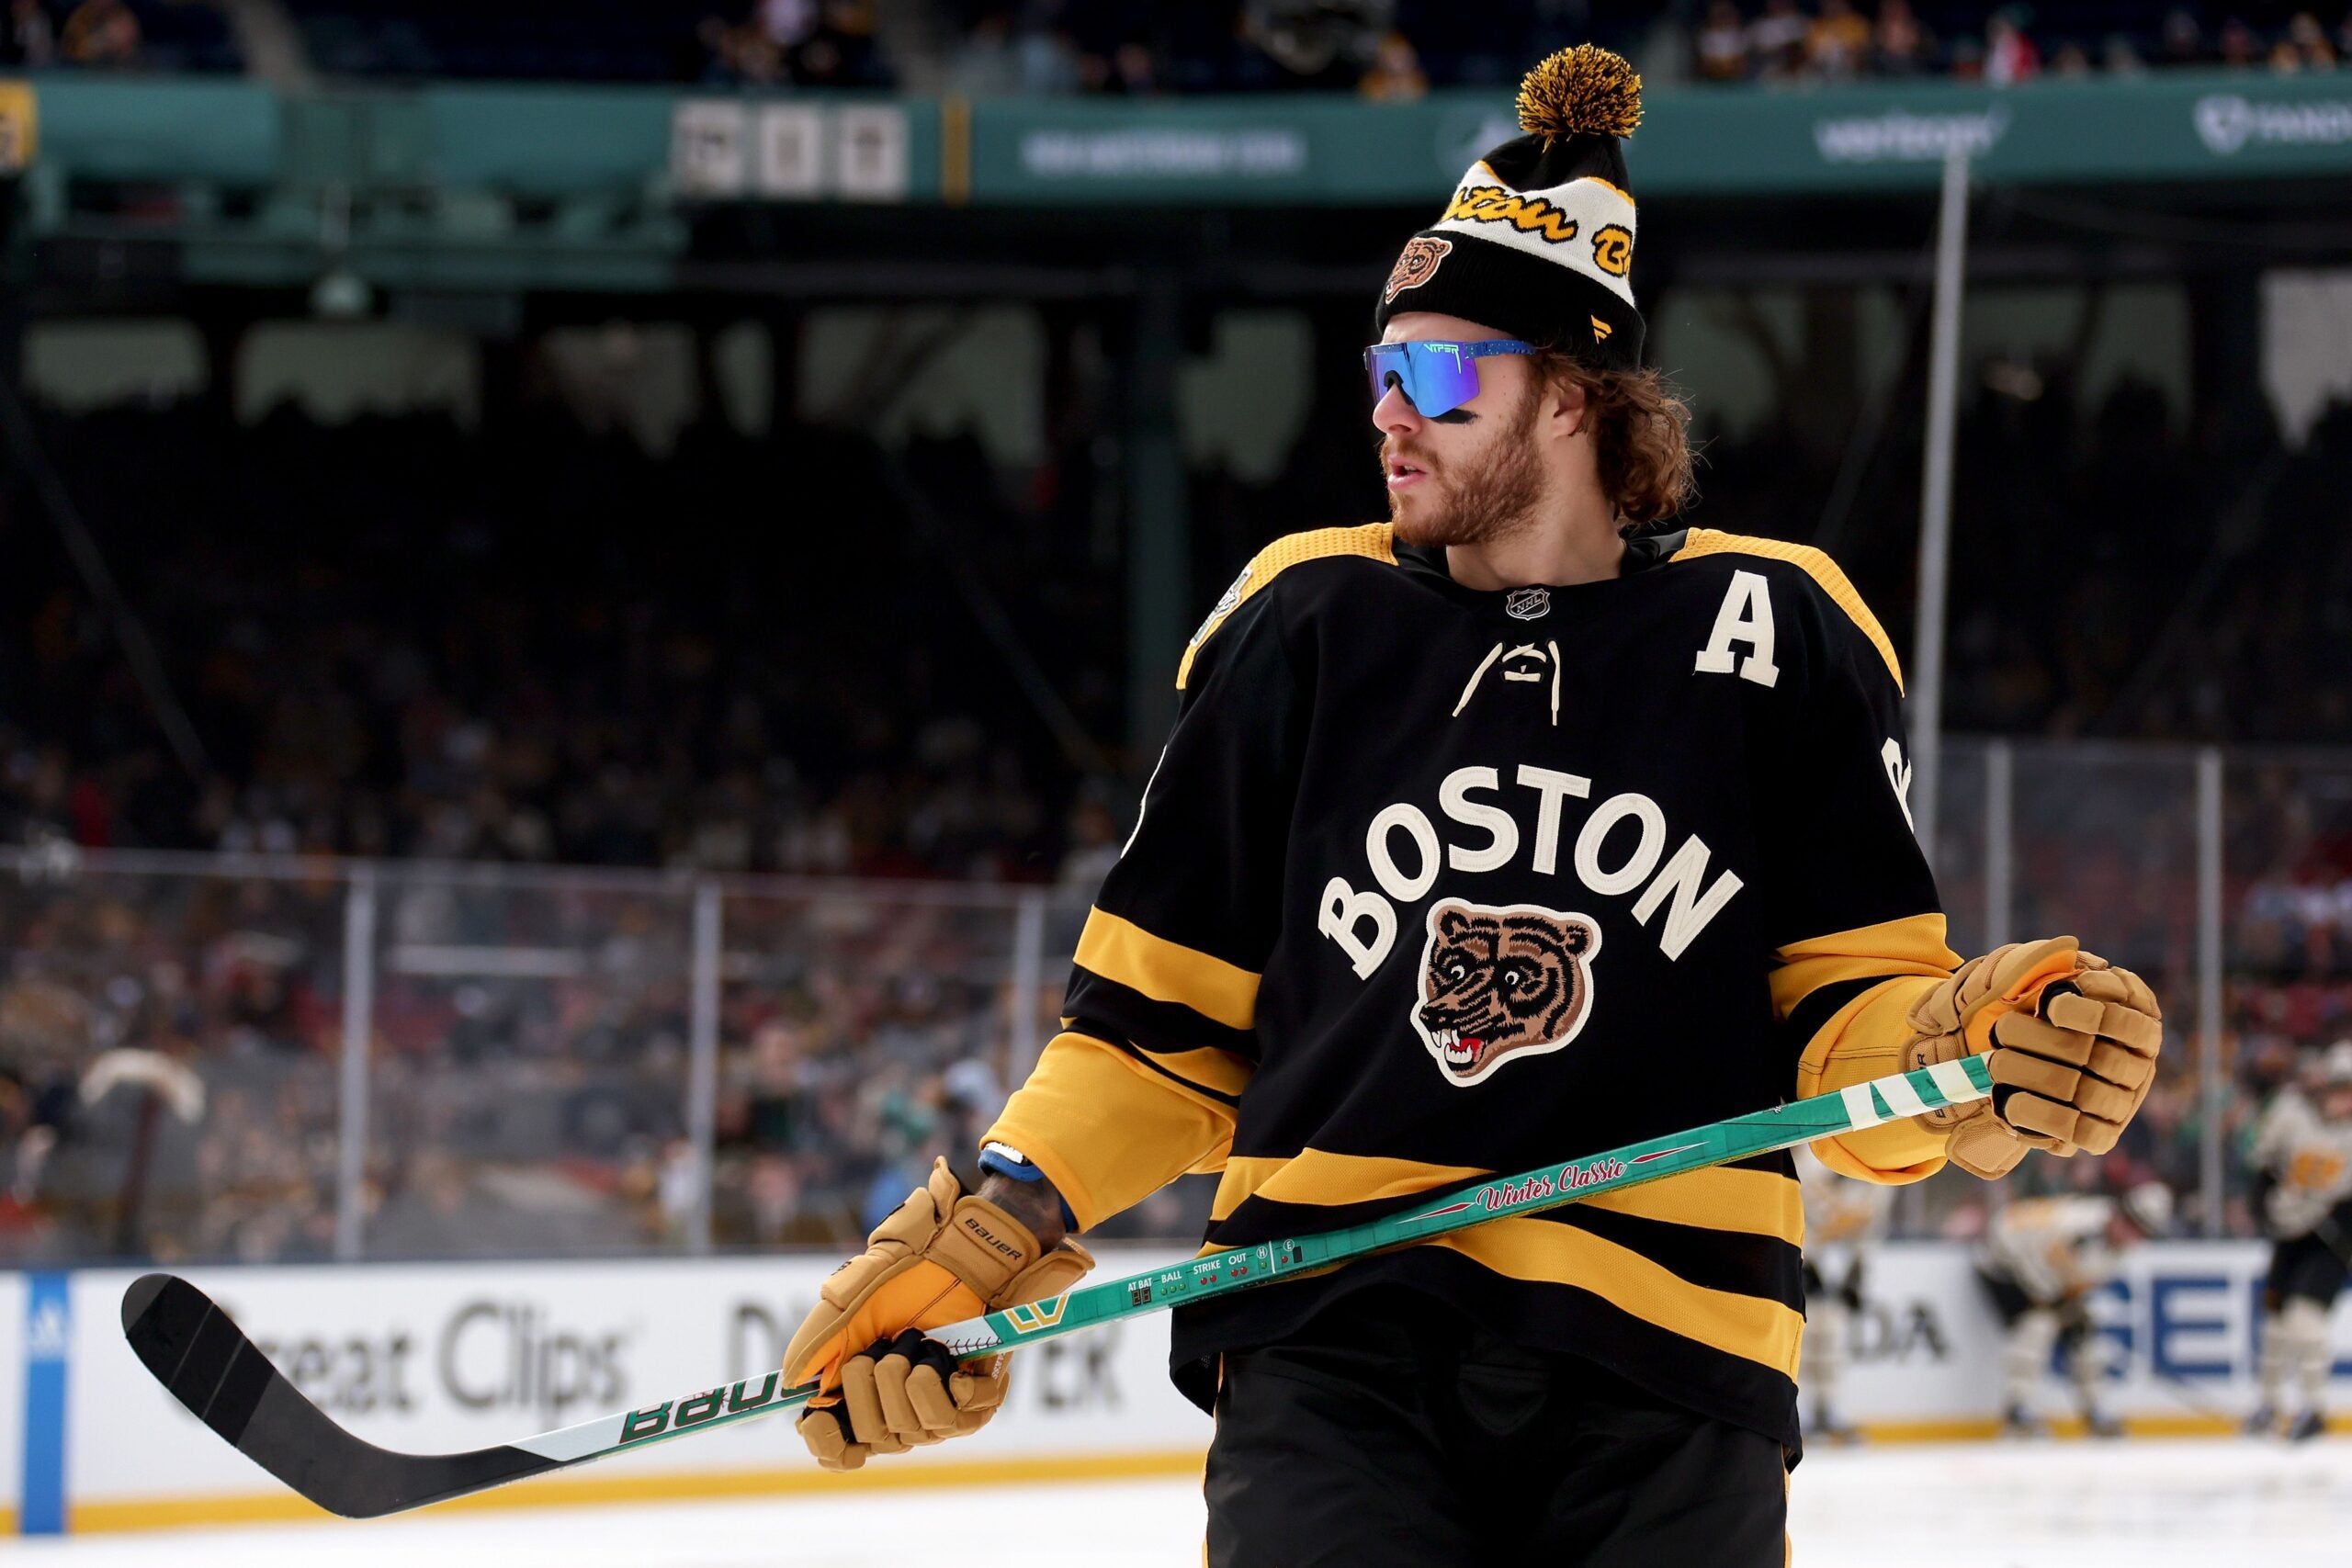 David Pastrnak before a game between the Bruins and Penguins.